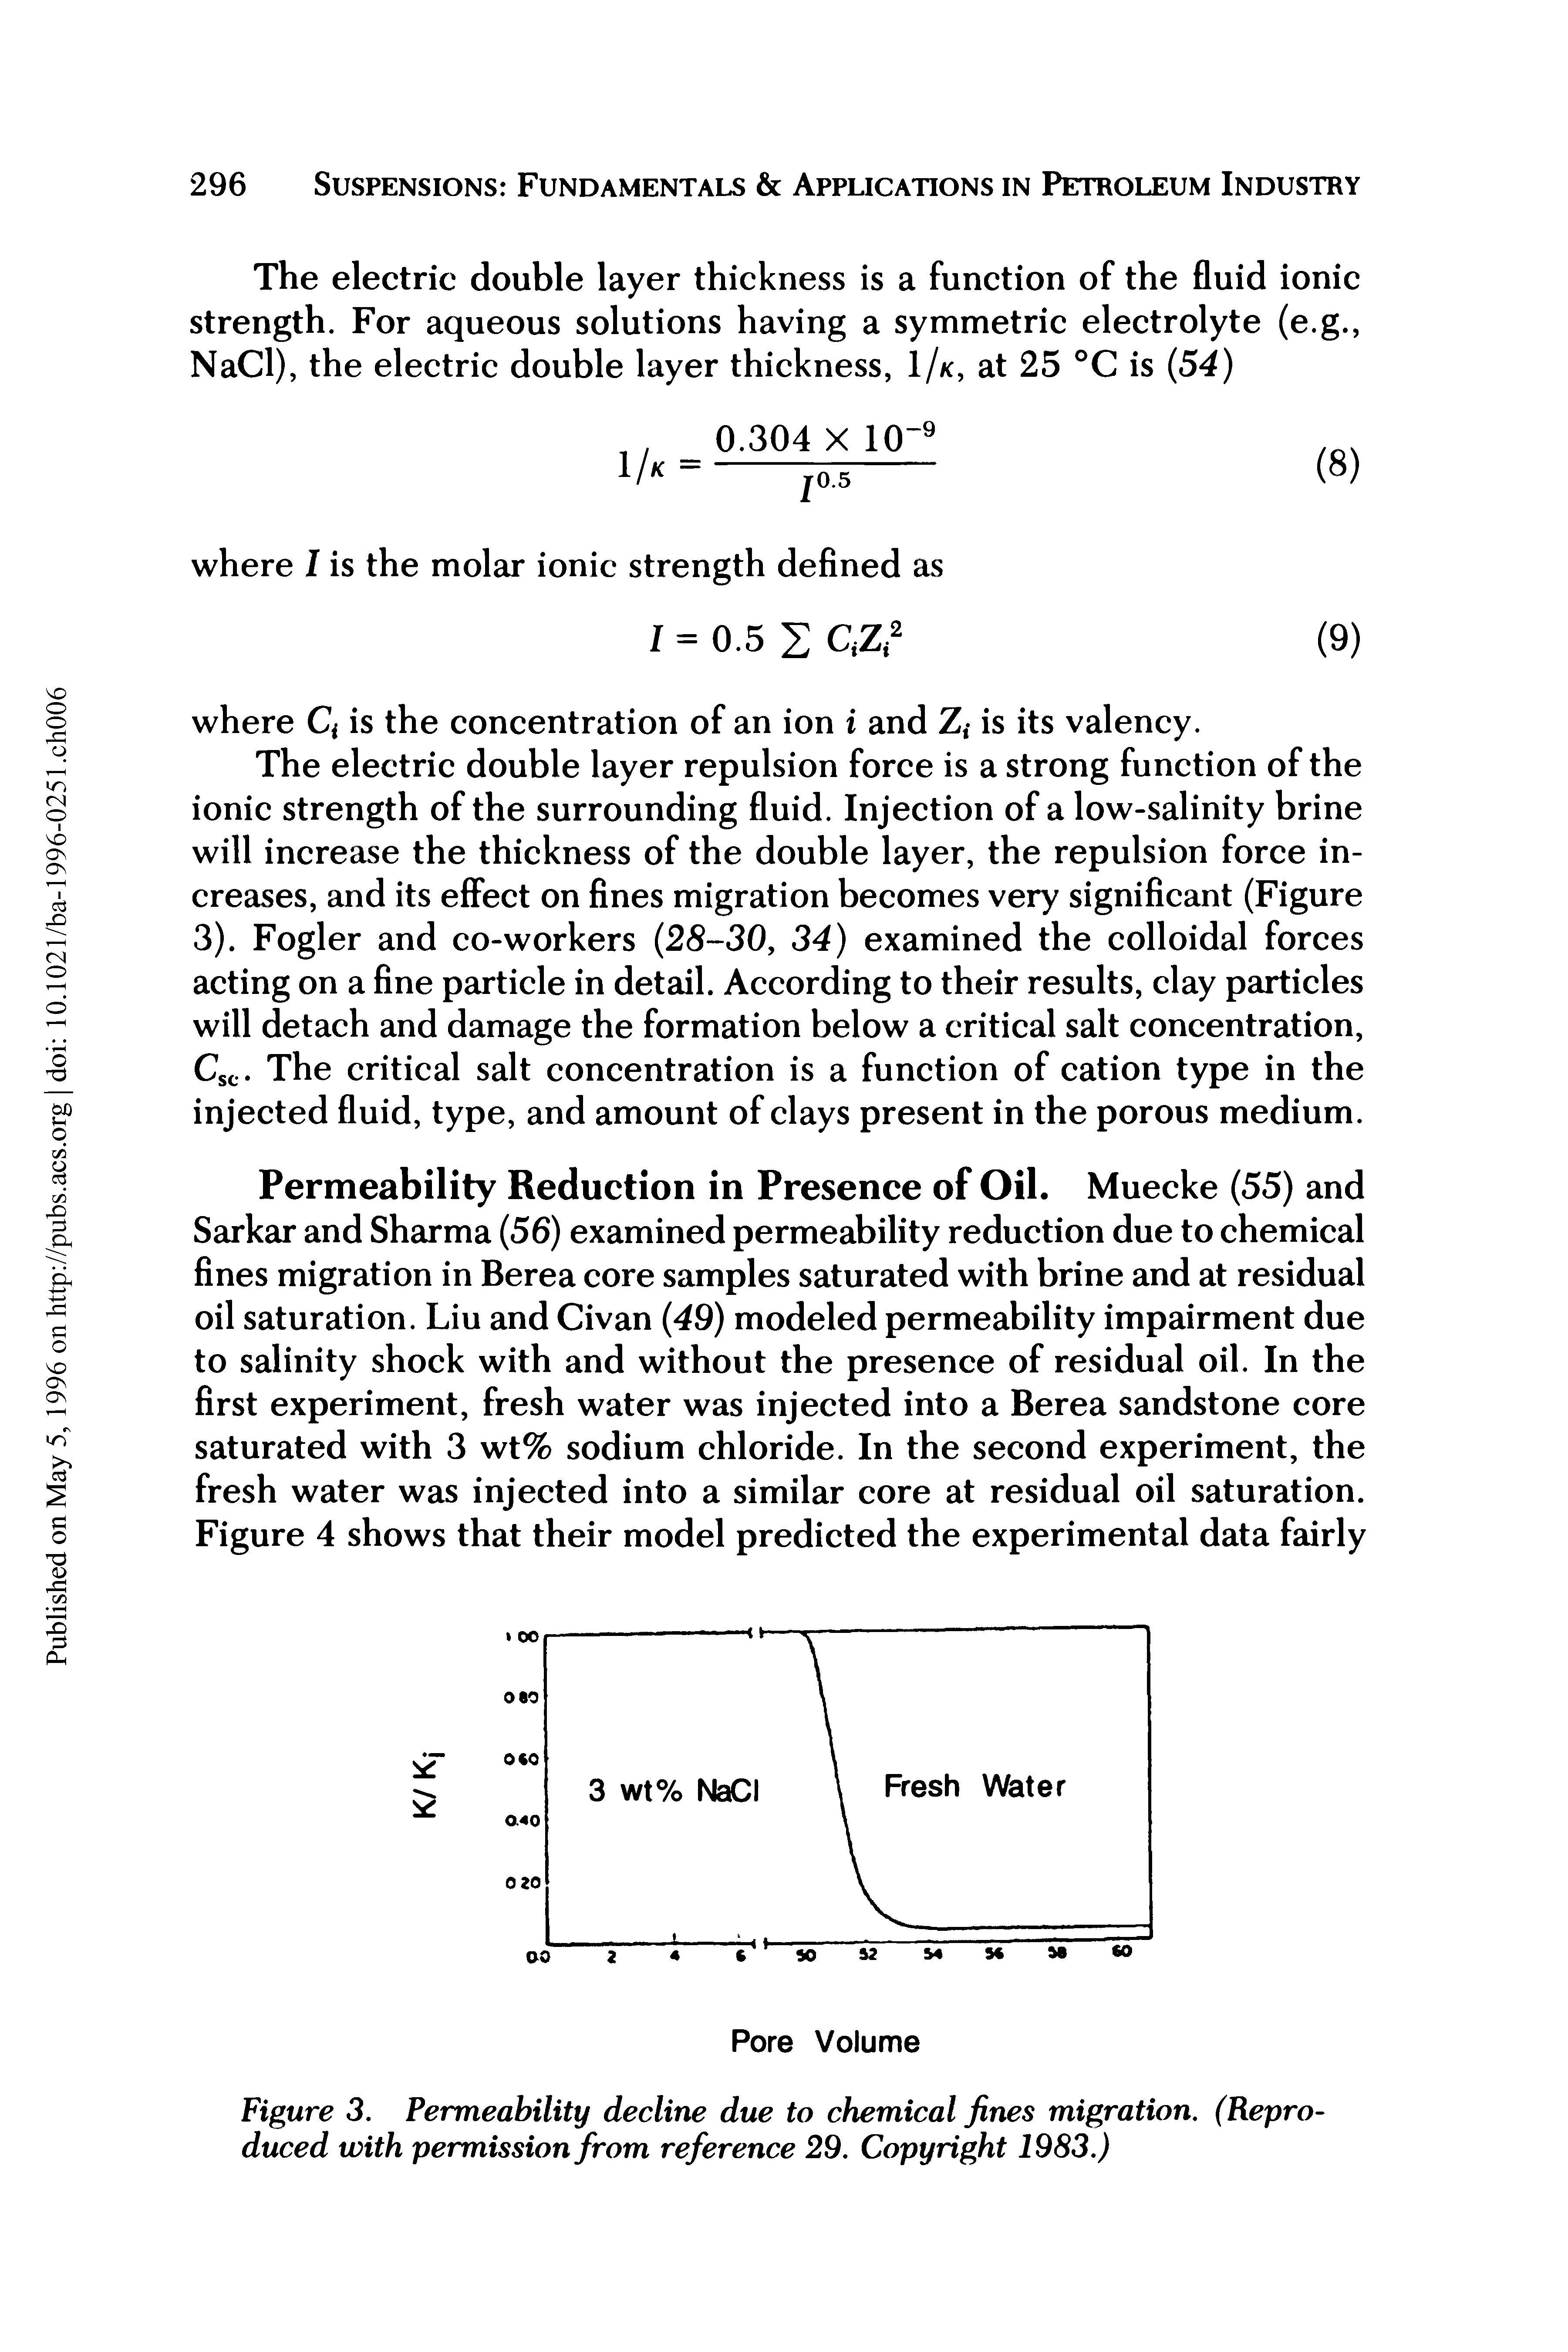 Figure 3. Permeability decline due to chemical fines migration. (Reproduced with permission from reference 29. Copyright 1983.)...